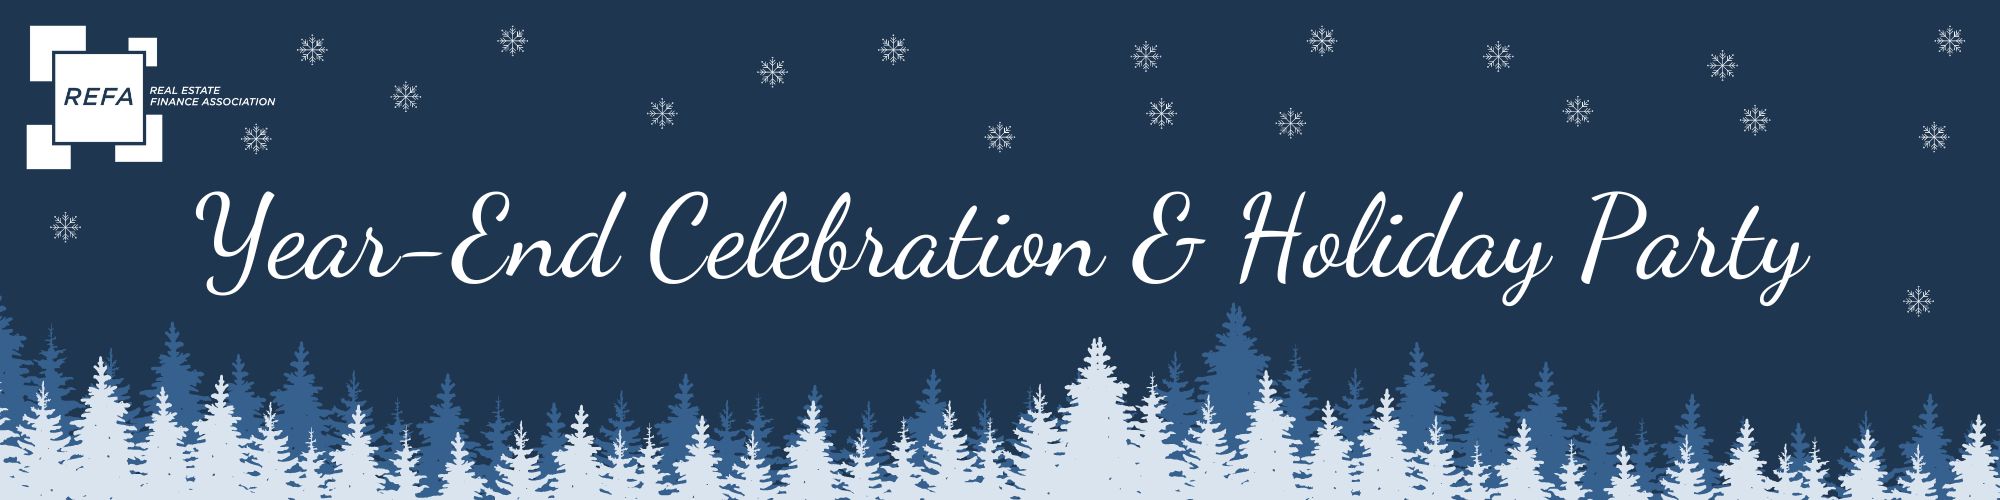 REFA Year-End Celebration & Holiday Party